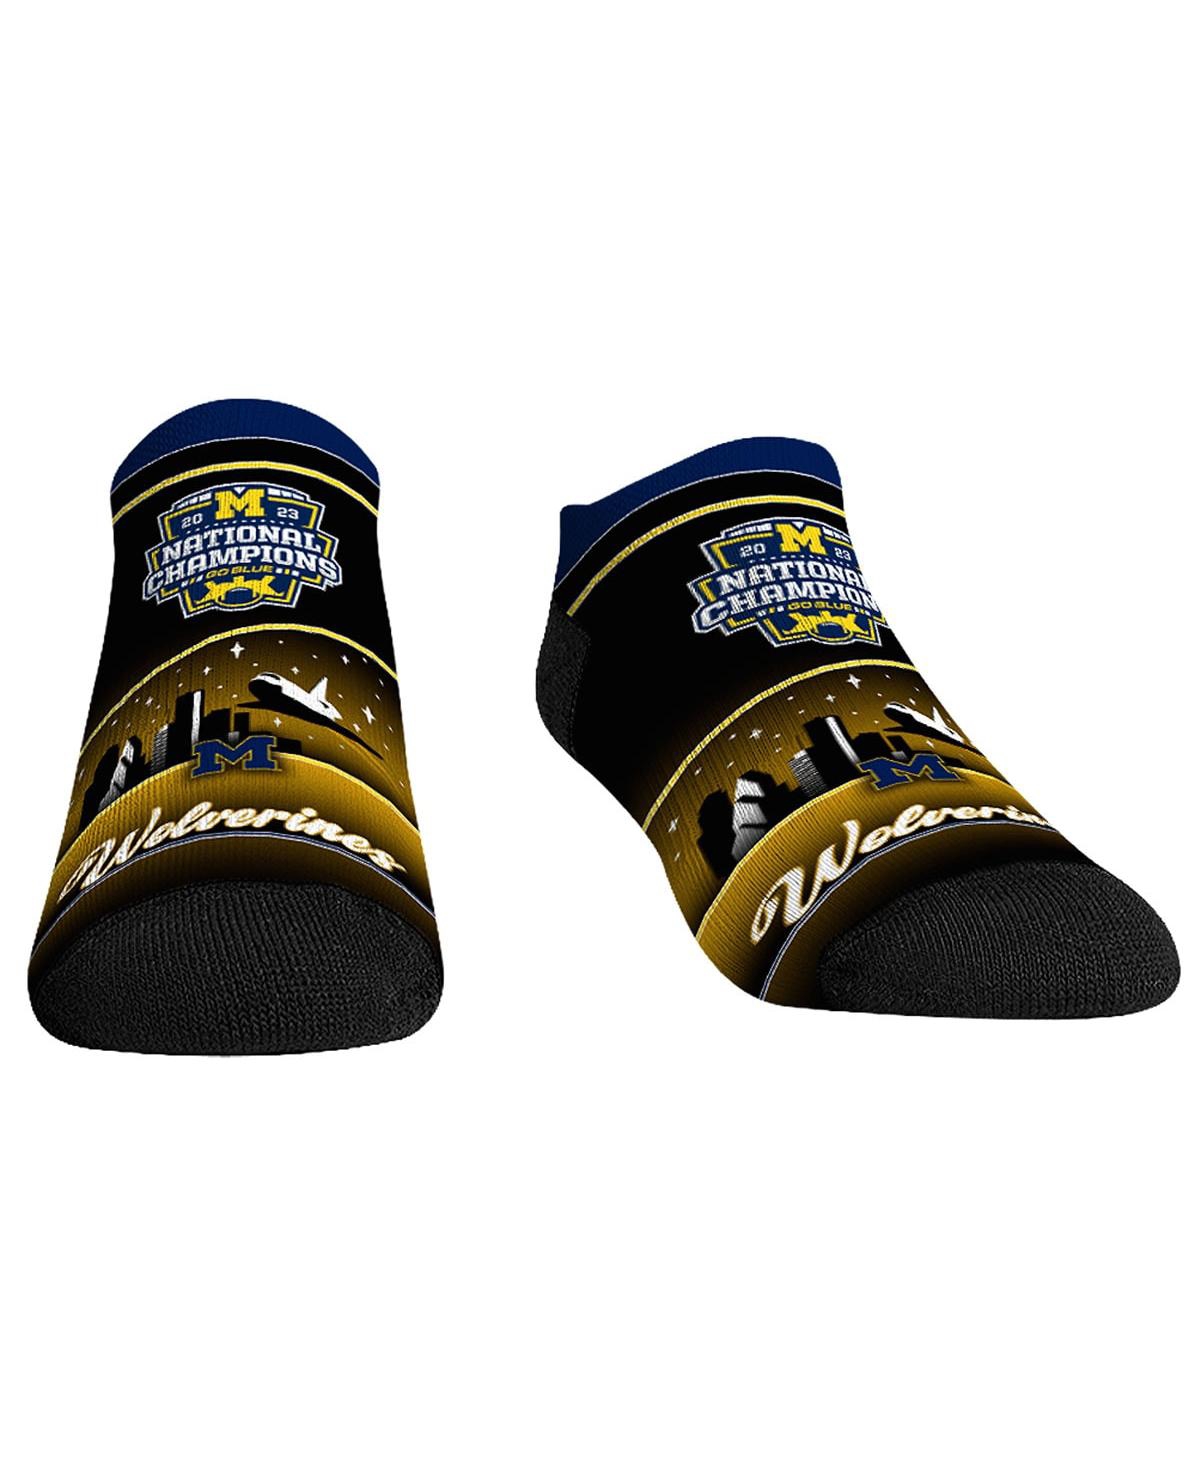 Men's and Women's Rock 'Em Socks Navy Michigan Wolverines College Football Playoff 2023 National Champions Low-Cut Socks - Navy